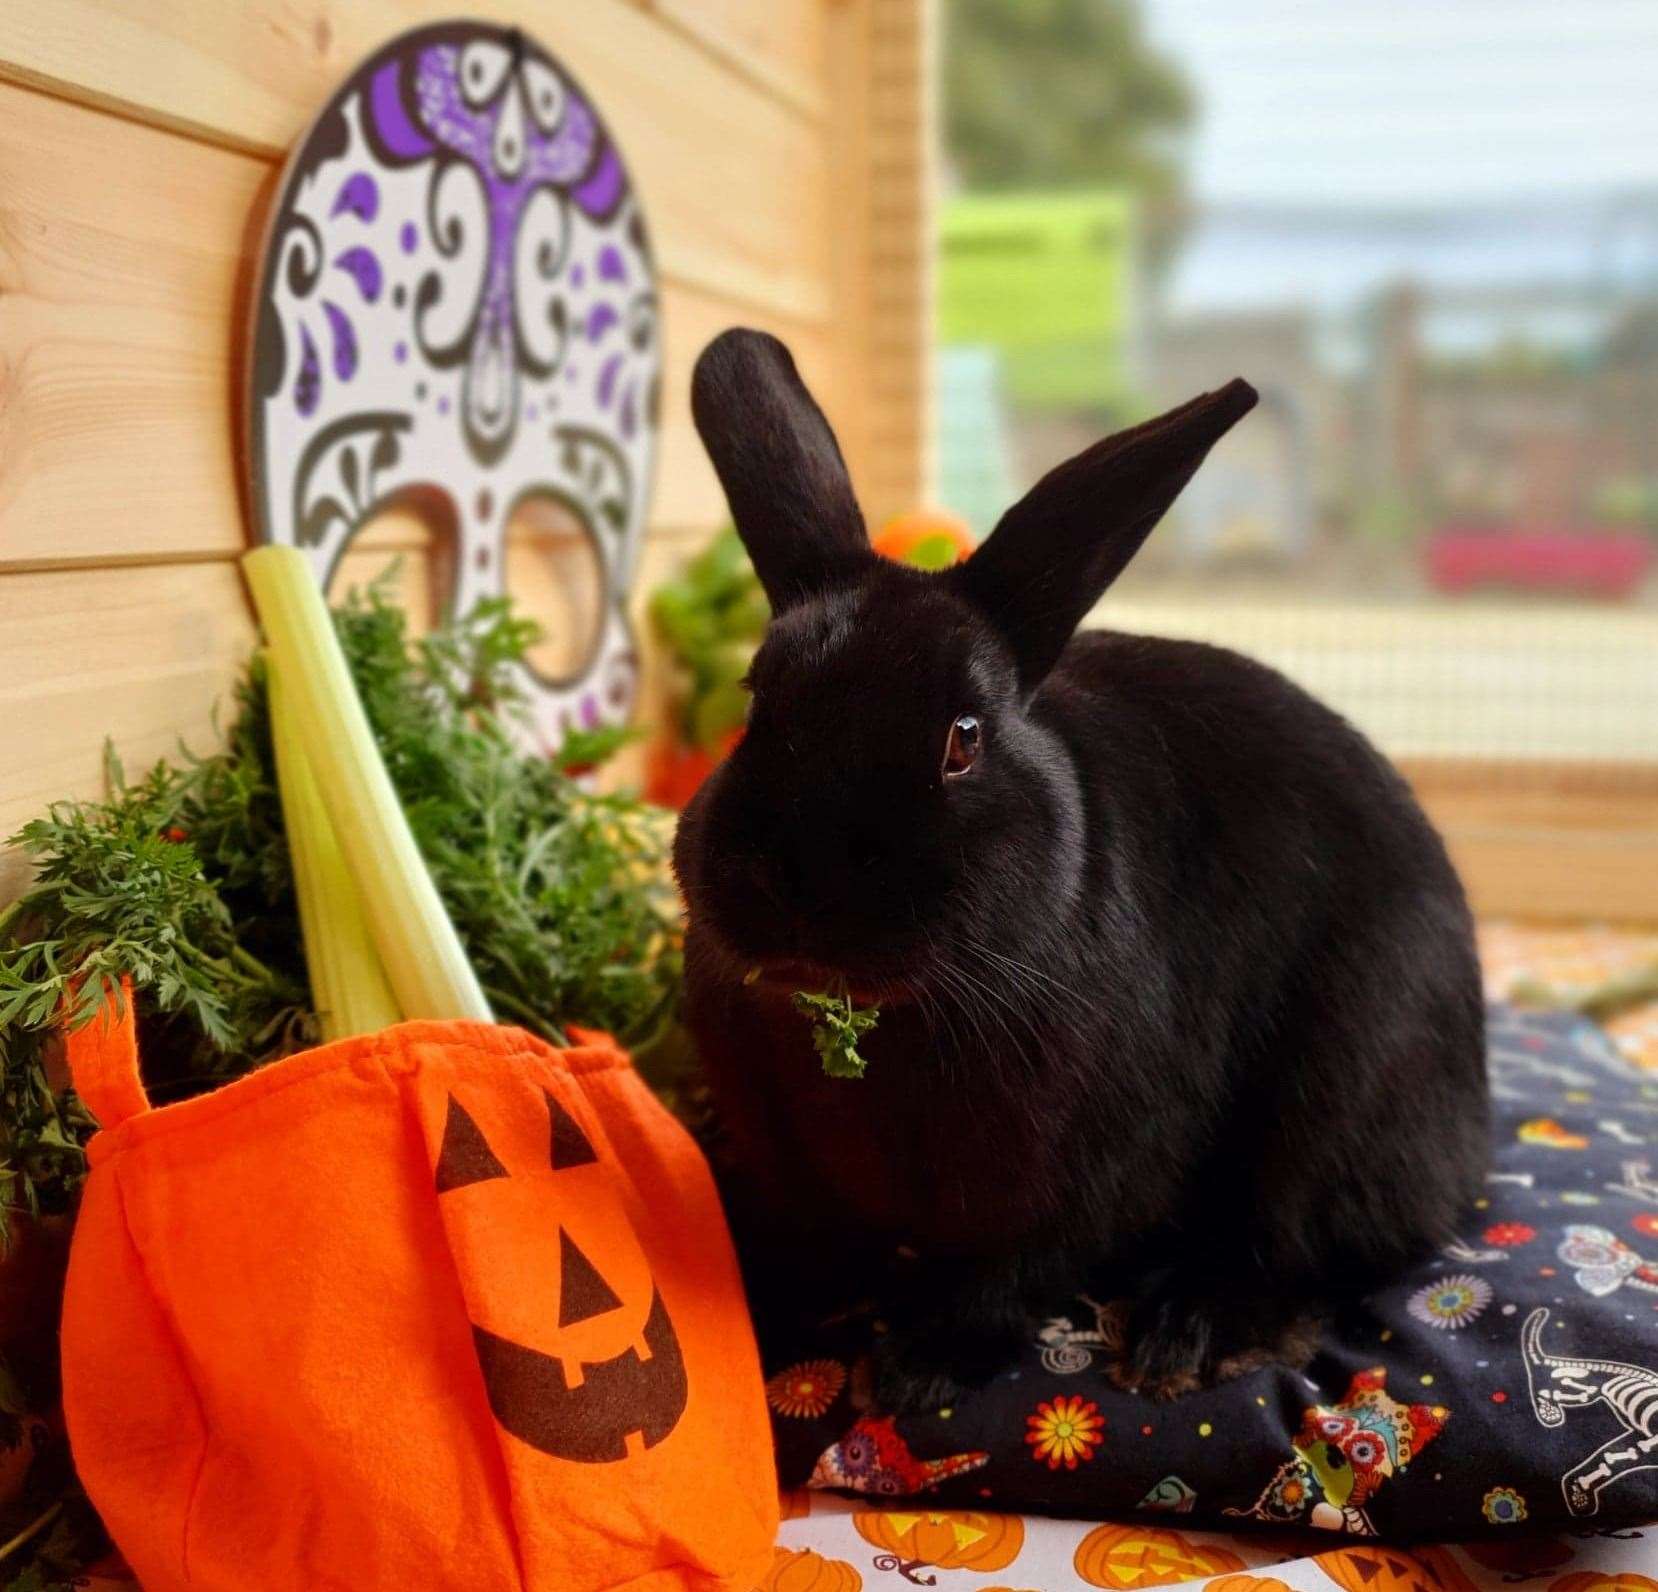 The branch has rescued seven black rabbits this year, and only one has been adopted